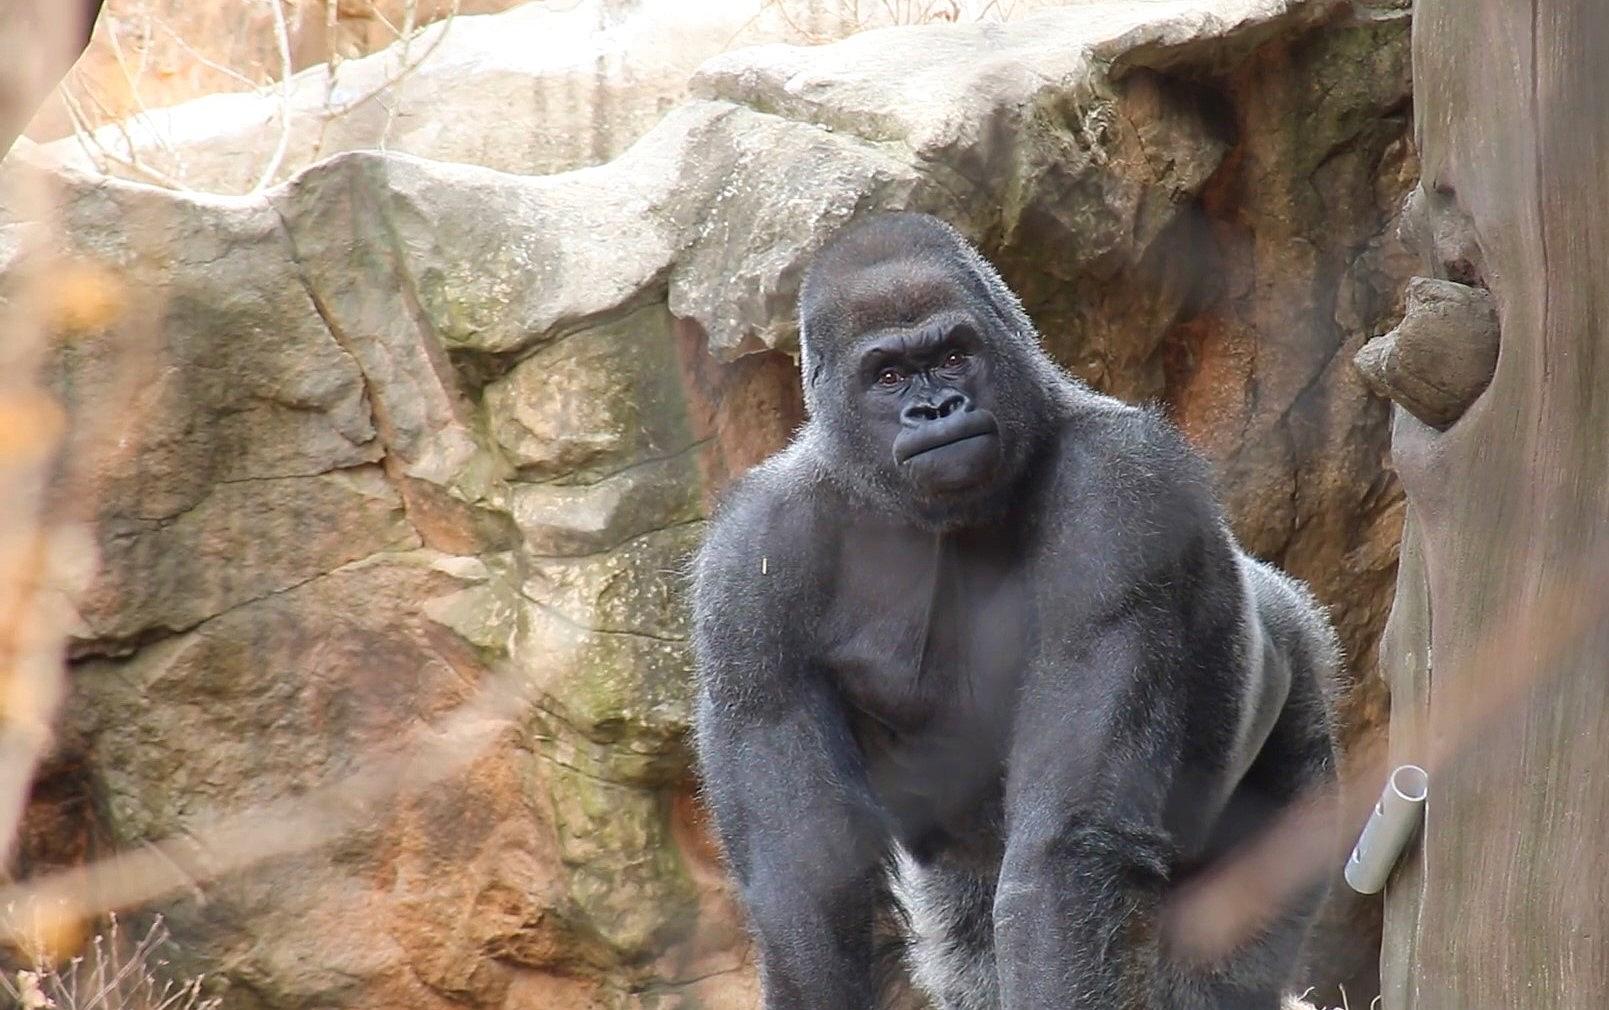 Pillow of Lowland gorilla adult male silverback in zoo, USA